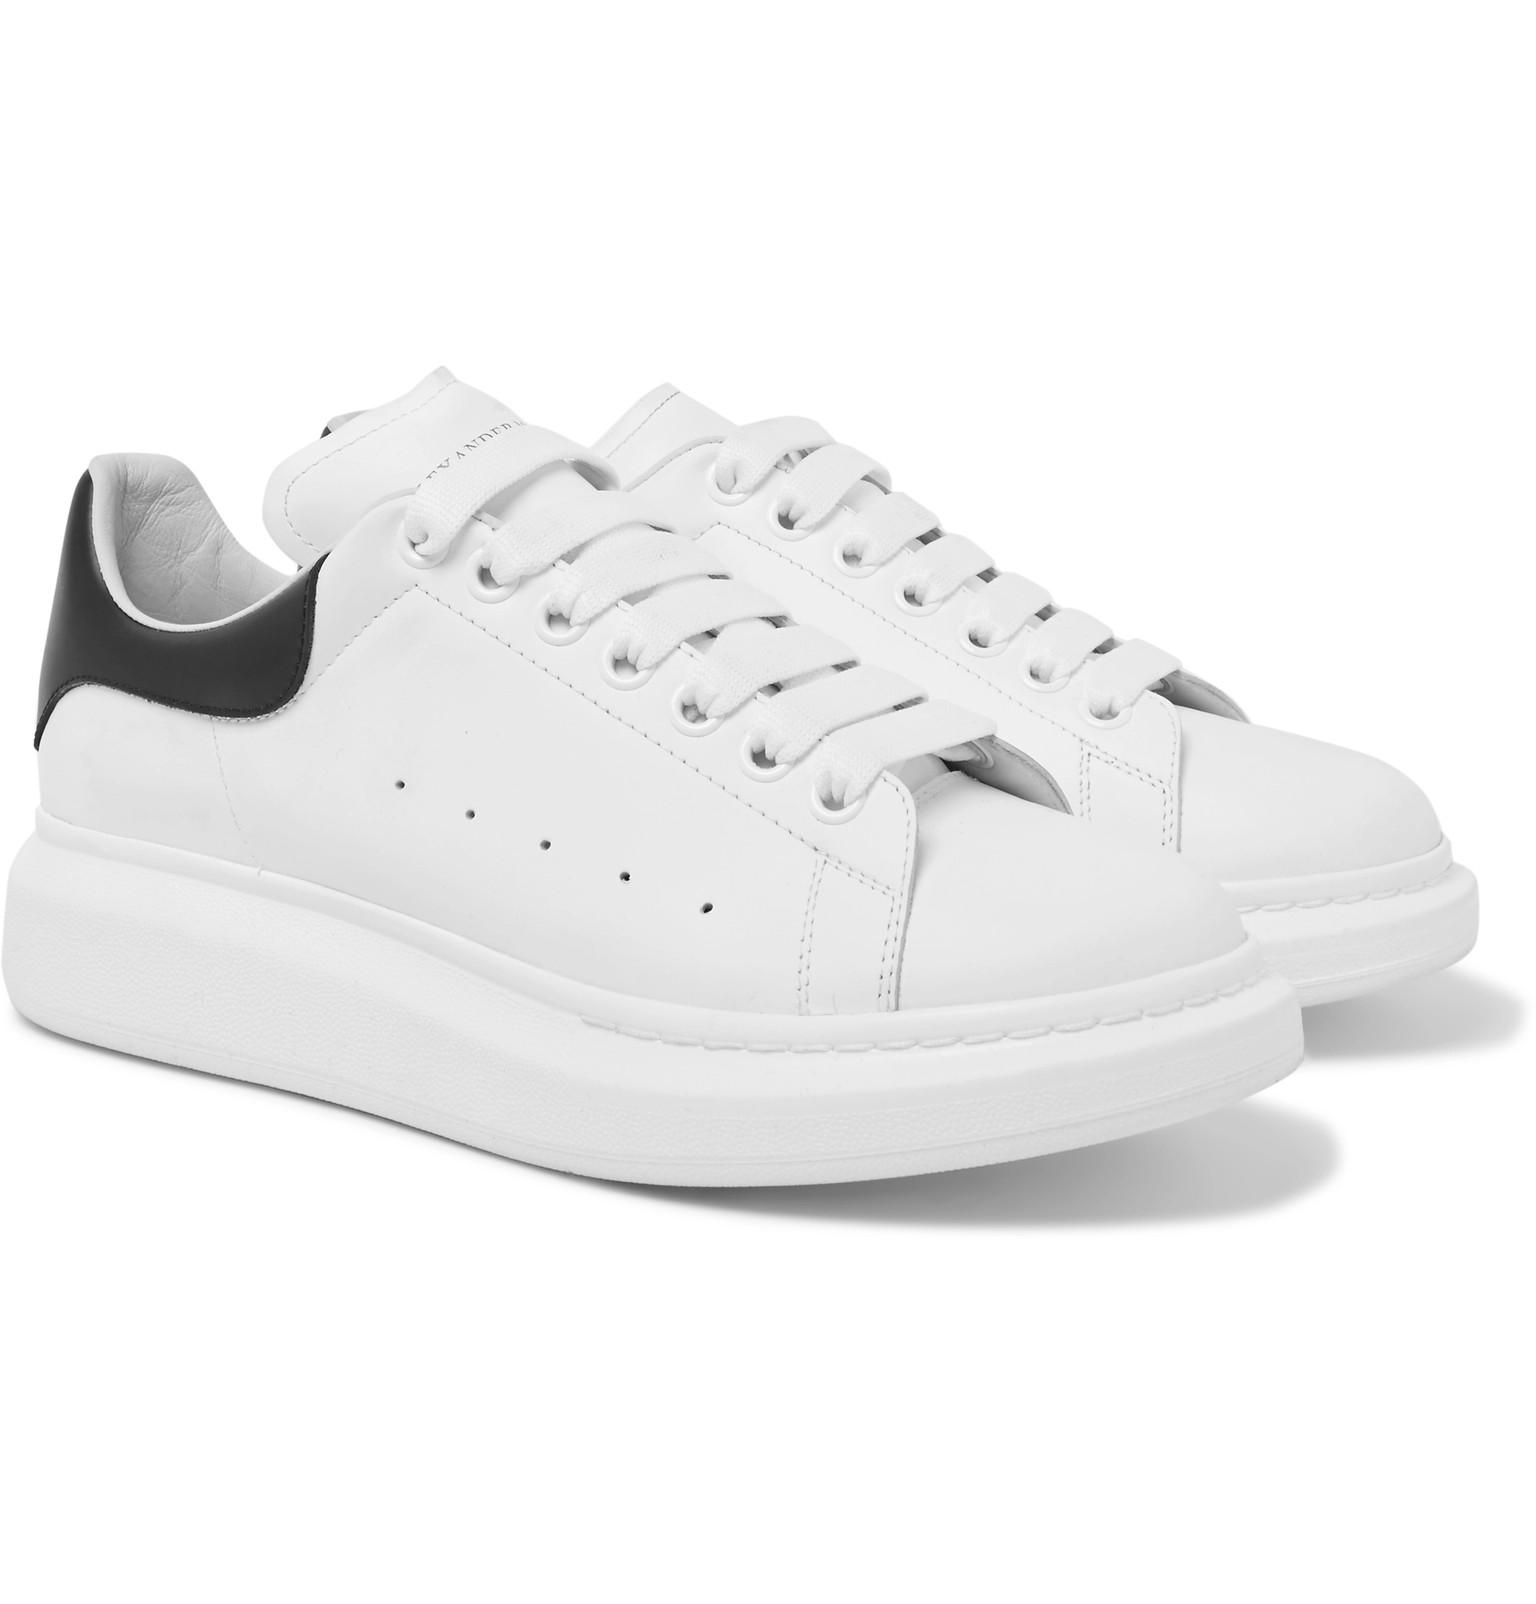 Lyst - Alexander Mcqueen Larry Exaggerated-sole Leather Sneakers in ...